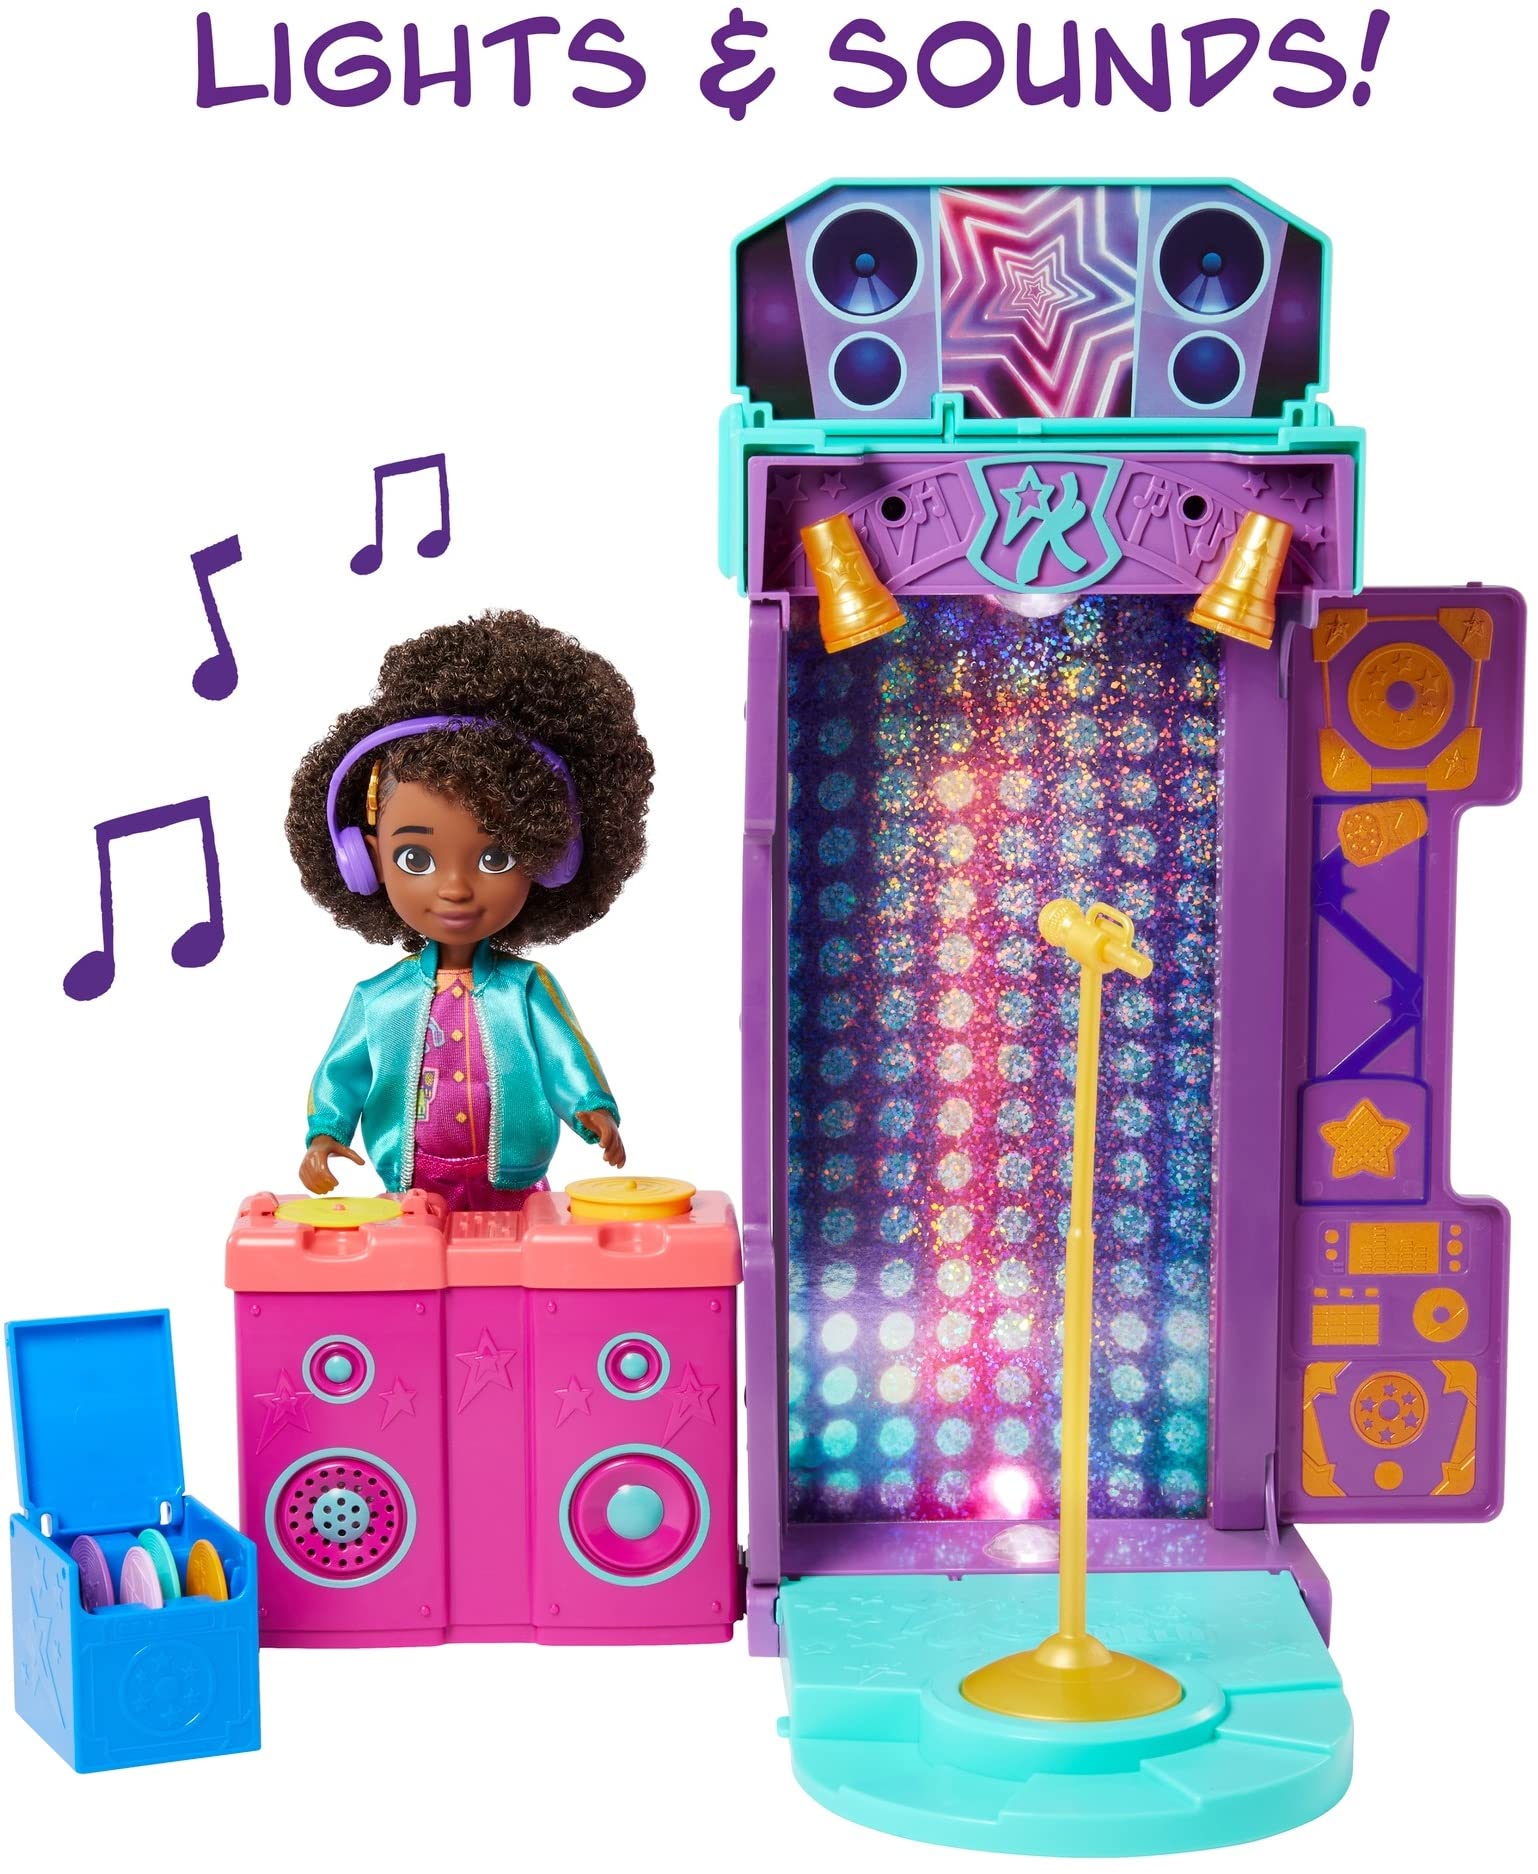 Karma's World Toy Playset w/ Doll, 2-in1 Lights & Sounds Musical Star Stage/Bed & Accessories $9.66 + Free Shipping w/ Prime or on $25+